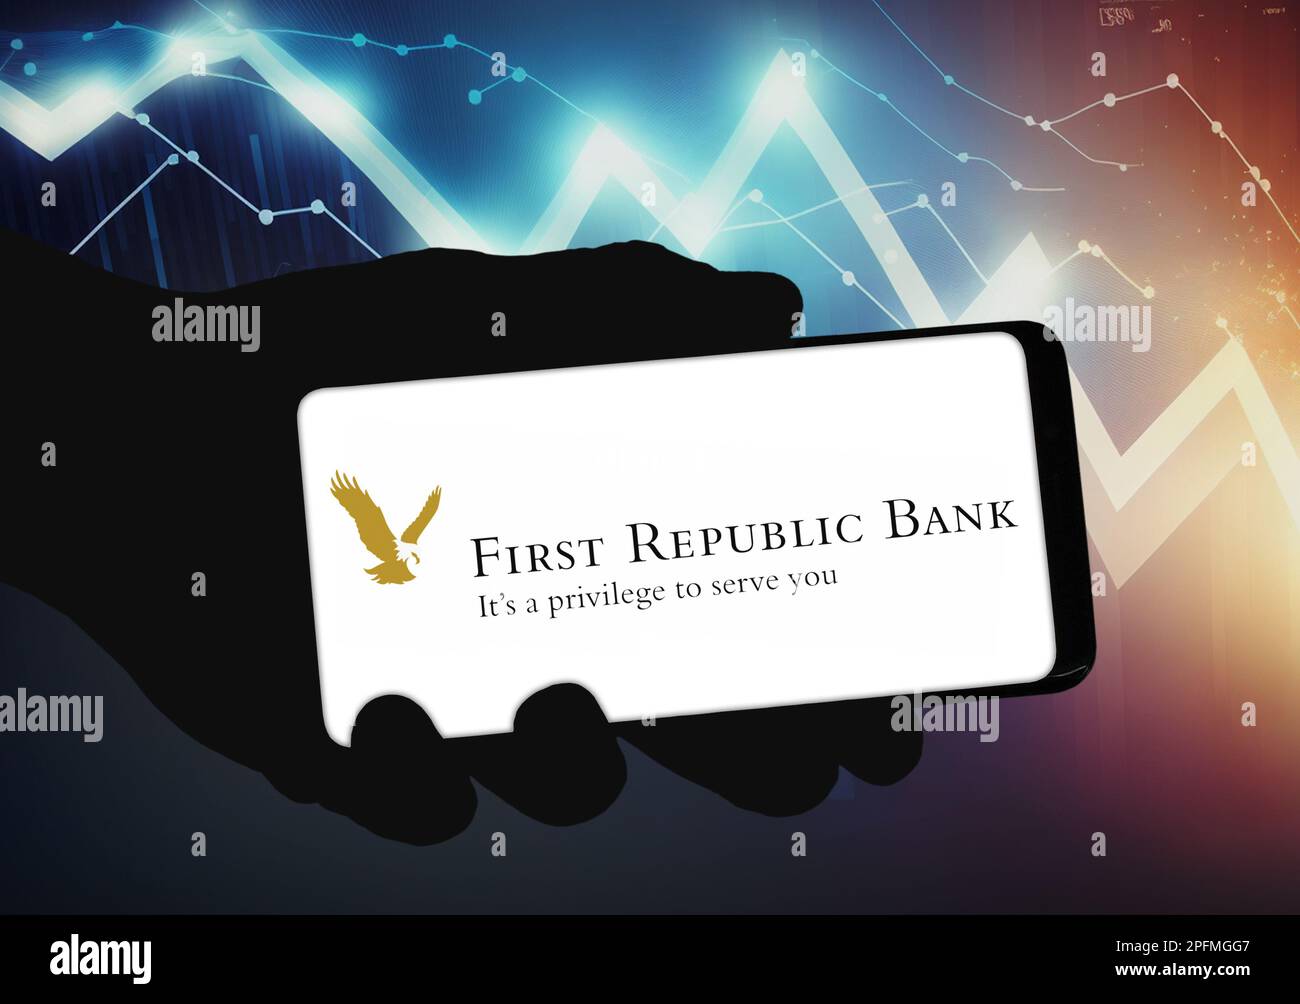 First Republic Bank - smartphone application Stock Photo